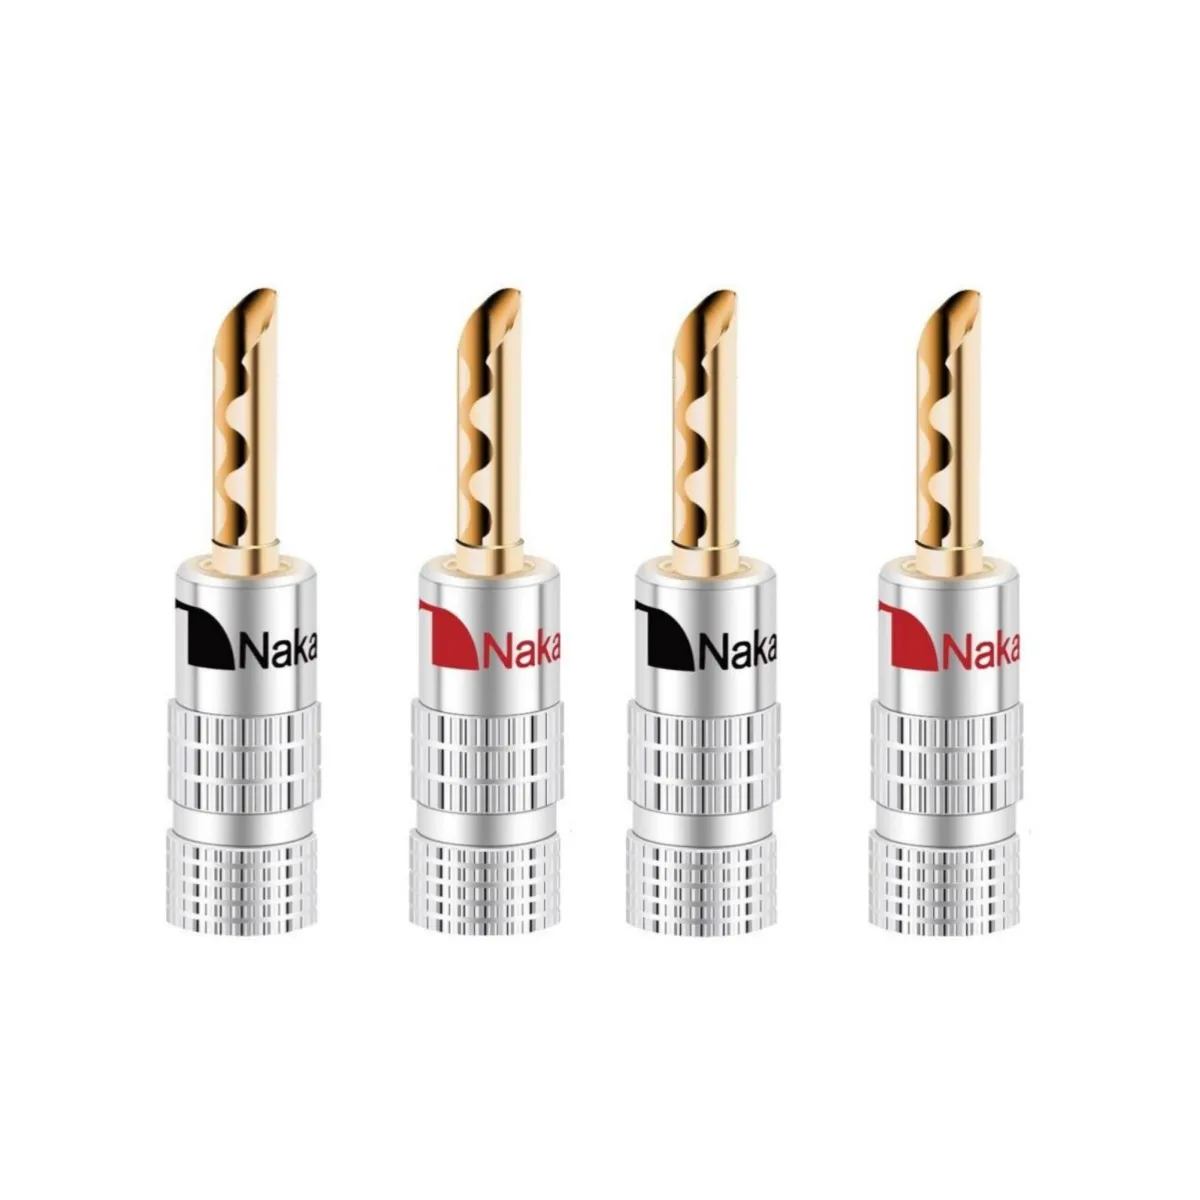 

4pcs/2pairs Nakamichi BANANA PLUGS 24K Gold-plated 4MM Banana Connector with Screw Lock For Audio Jack Speaker Plugs Black&Red